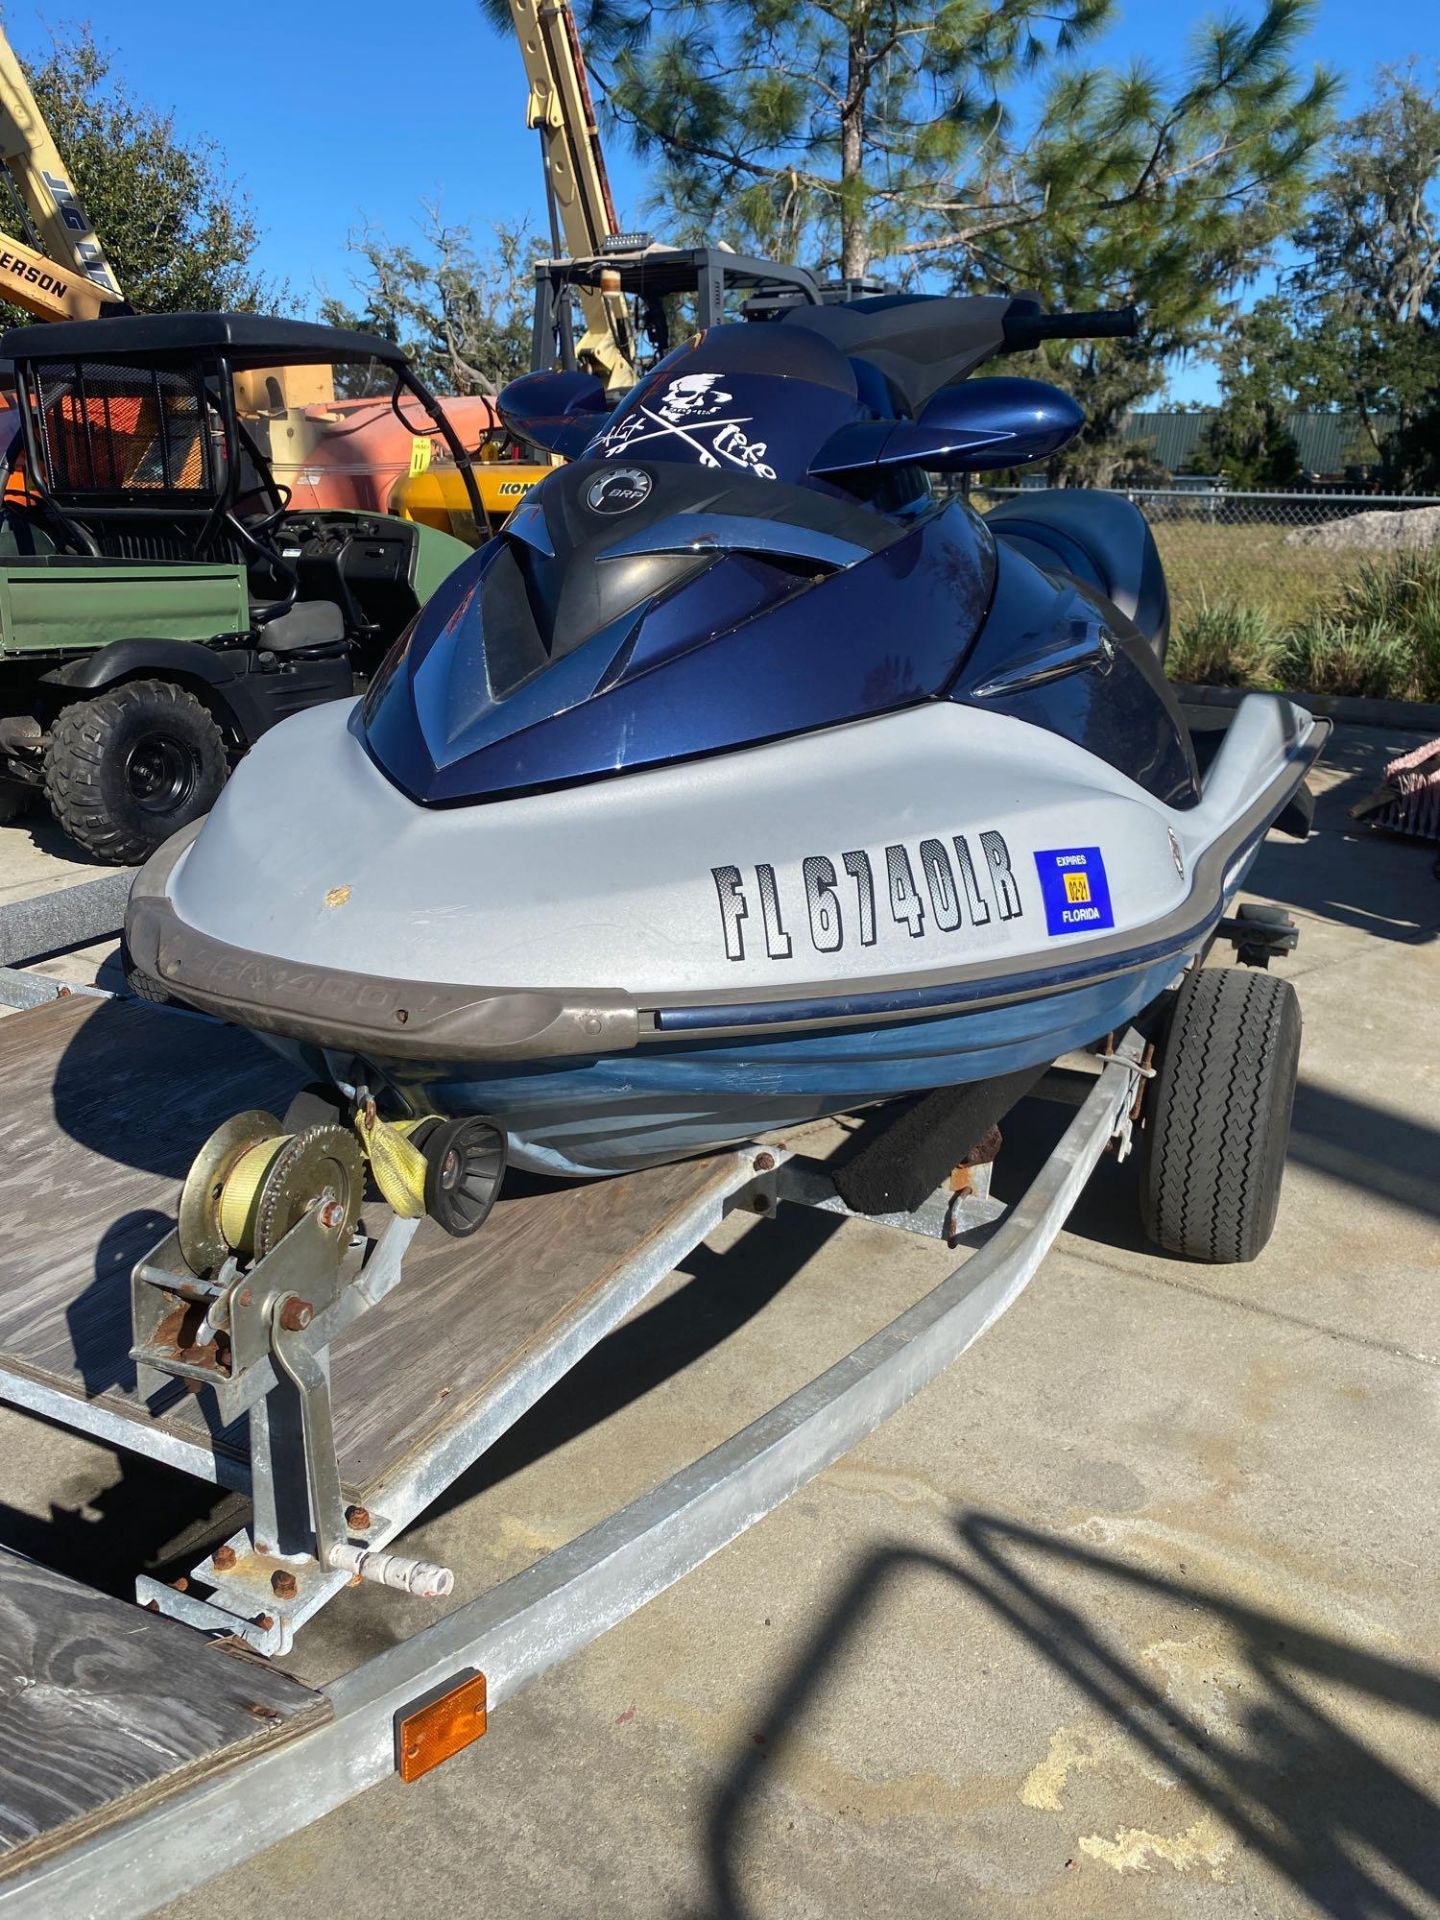 2004 SEADOO GTI WAVE RUNNER WITH TRAILER, UPDATED EXHAUST, UPDATED INTAKE MANIFOLD, UPDATED IMPELLER - Image 2 of 9